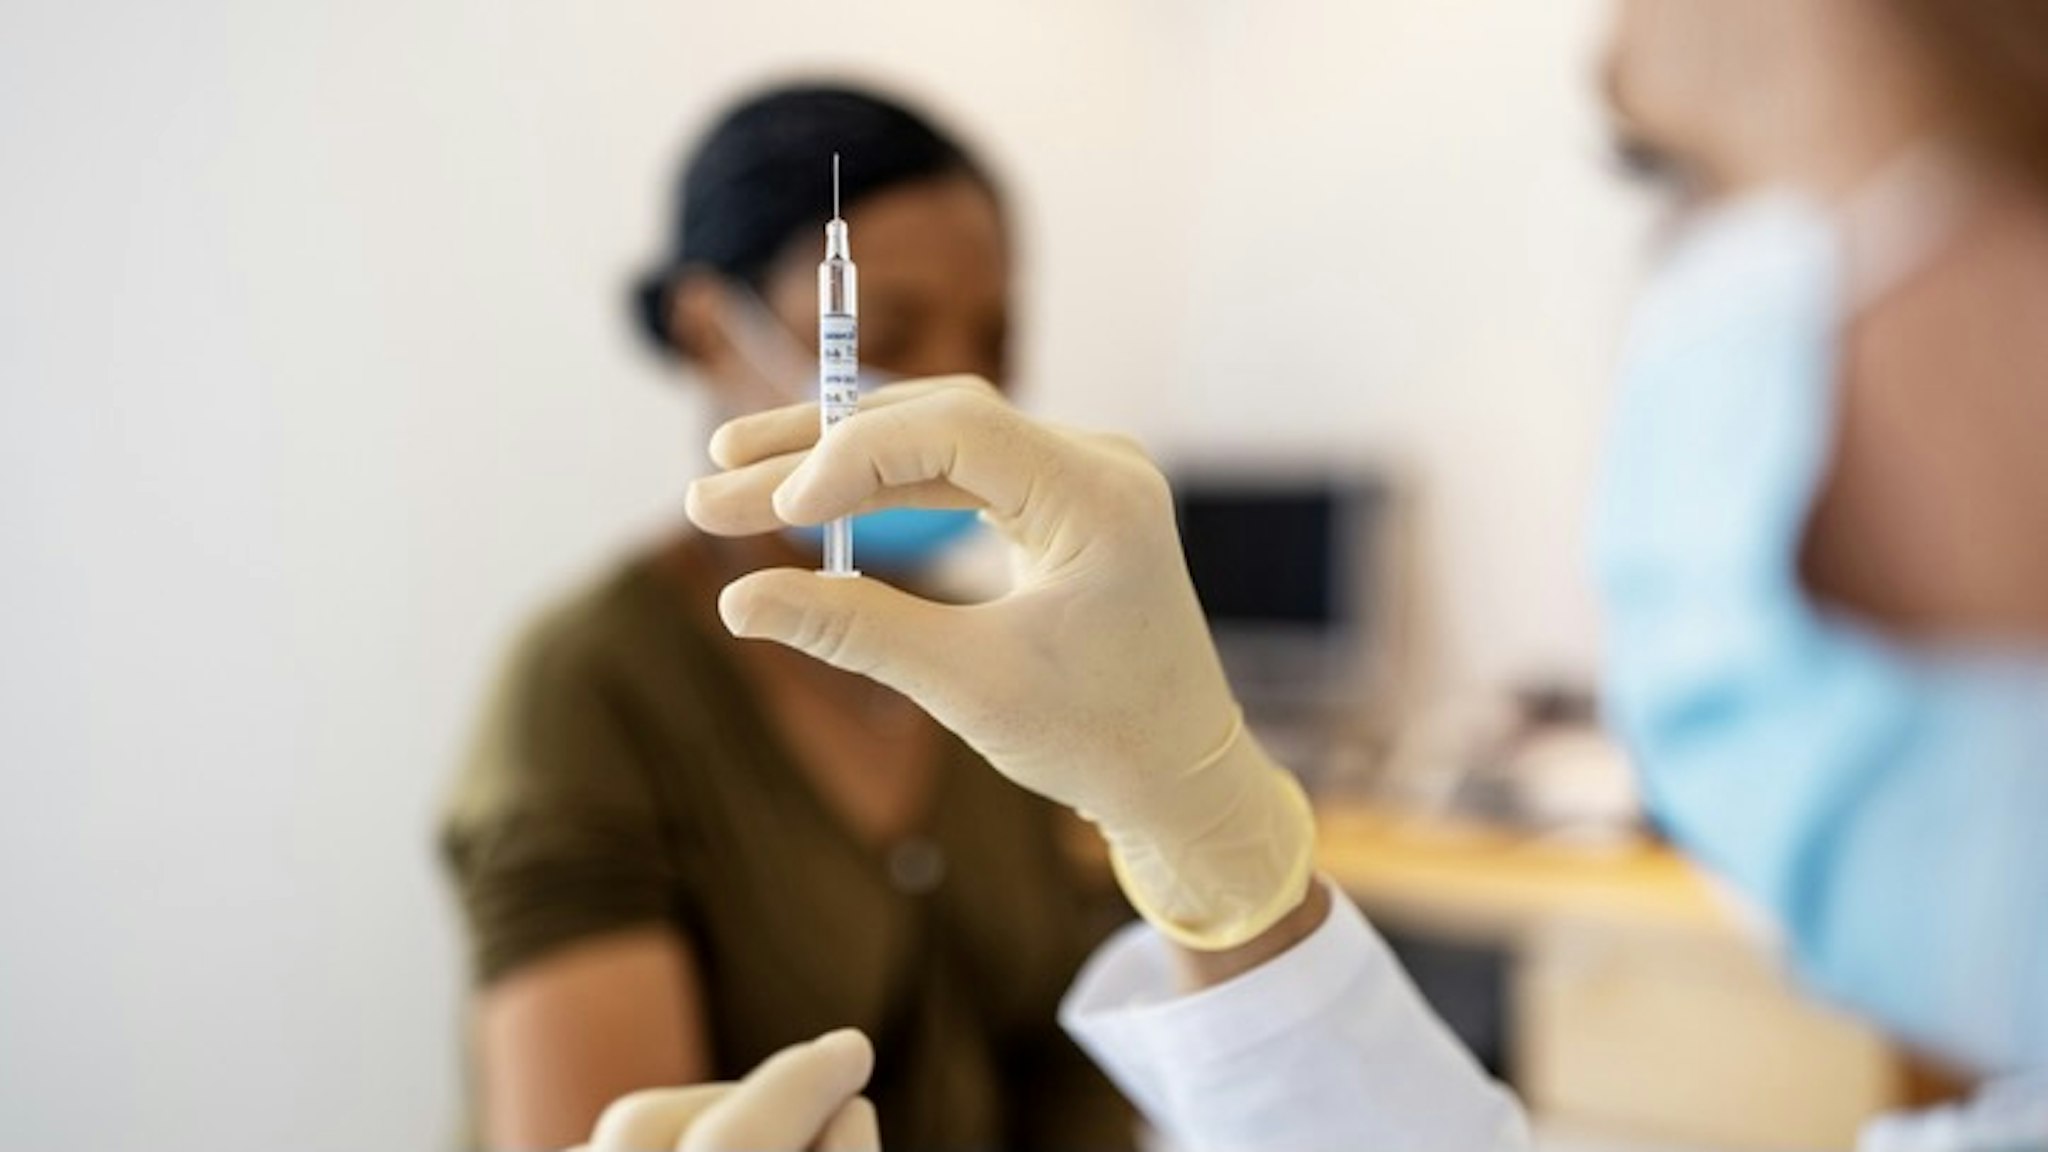 Doctor preparing flu or coronavirus injection - stock photo Close up of doctor preparing injection for vaccination in clinic. Hands of a female doctor preparing flu injection.Luis Alvarez via Getty Images